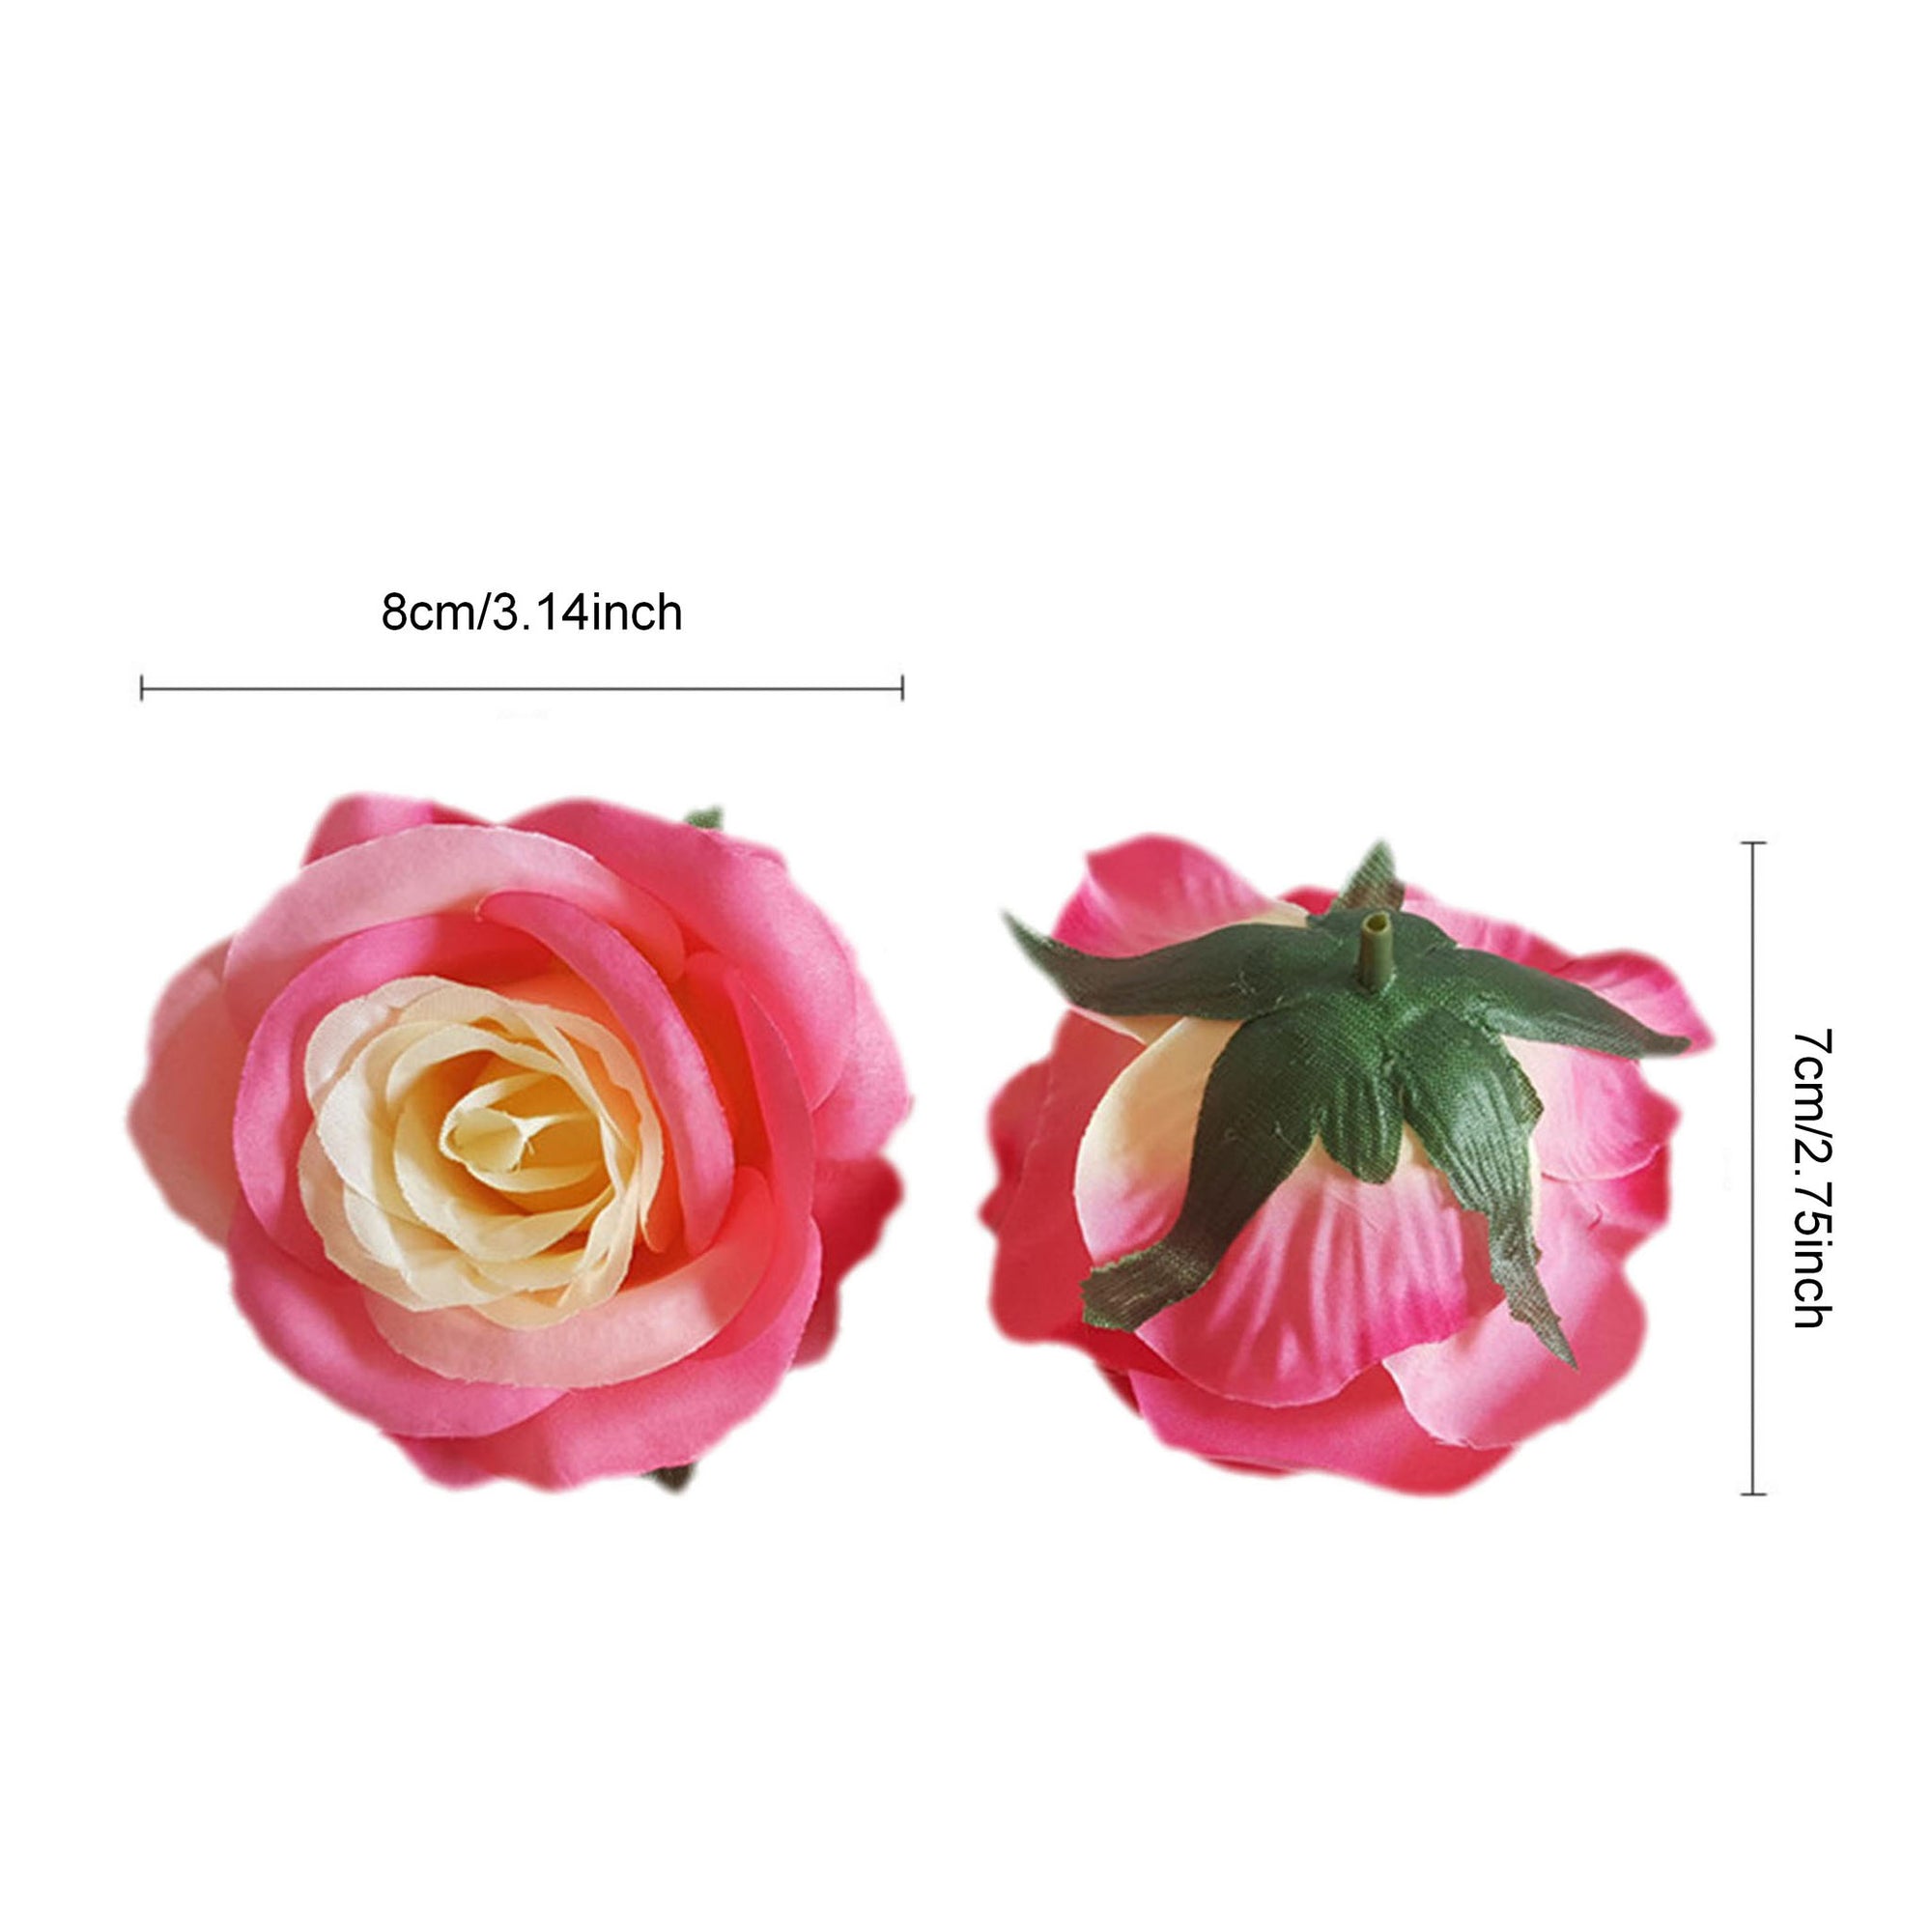 Silk Flowers Wholesale Roses Heads 3 inch 100pcs